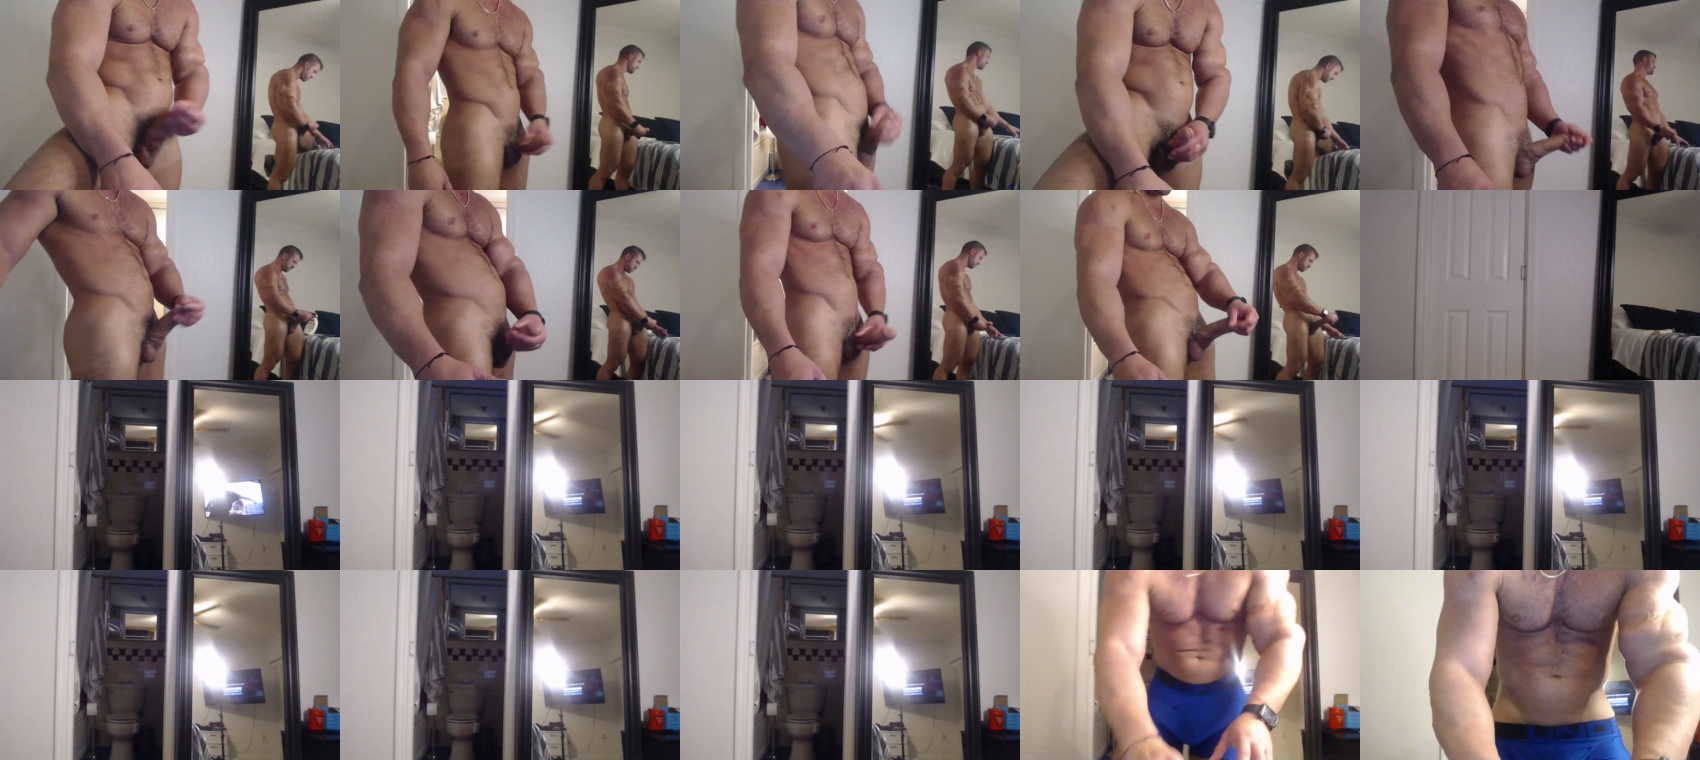 colbymoney natural CAM SHOW @ Chaturbate 12-01-2022